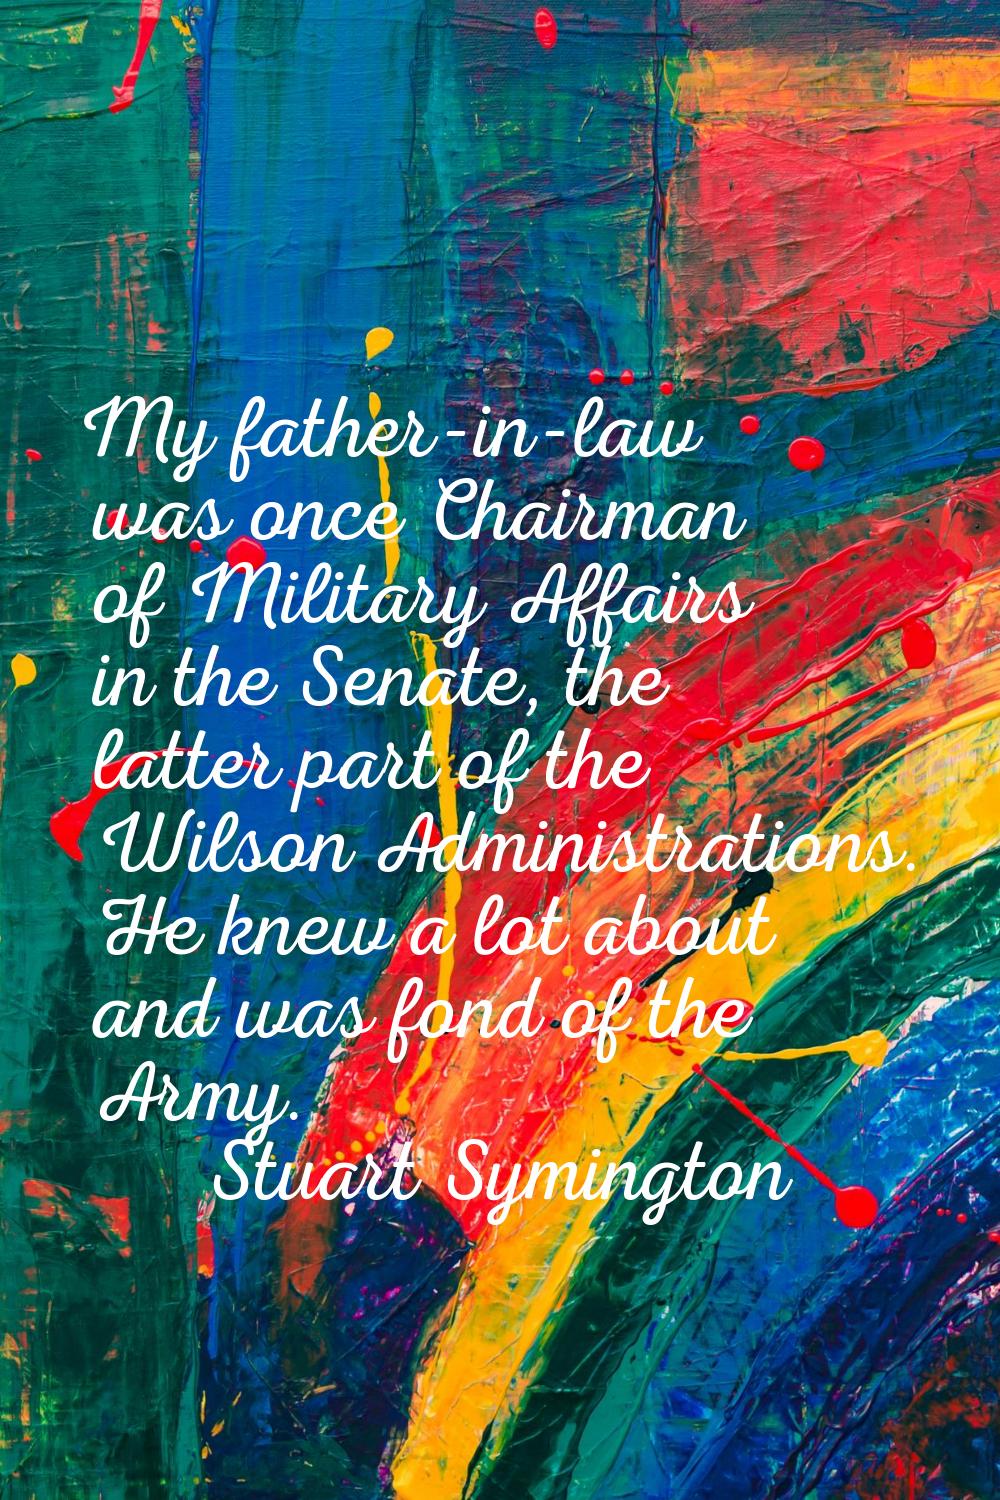 My father-in-law was once Chairman of Military Affairs in the Senate, the latter part of the Wilson